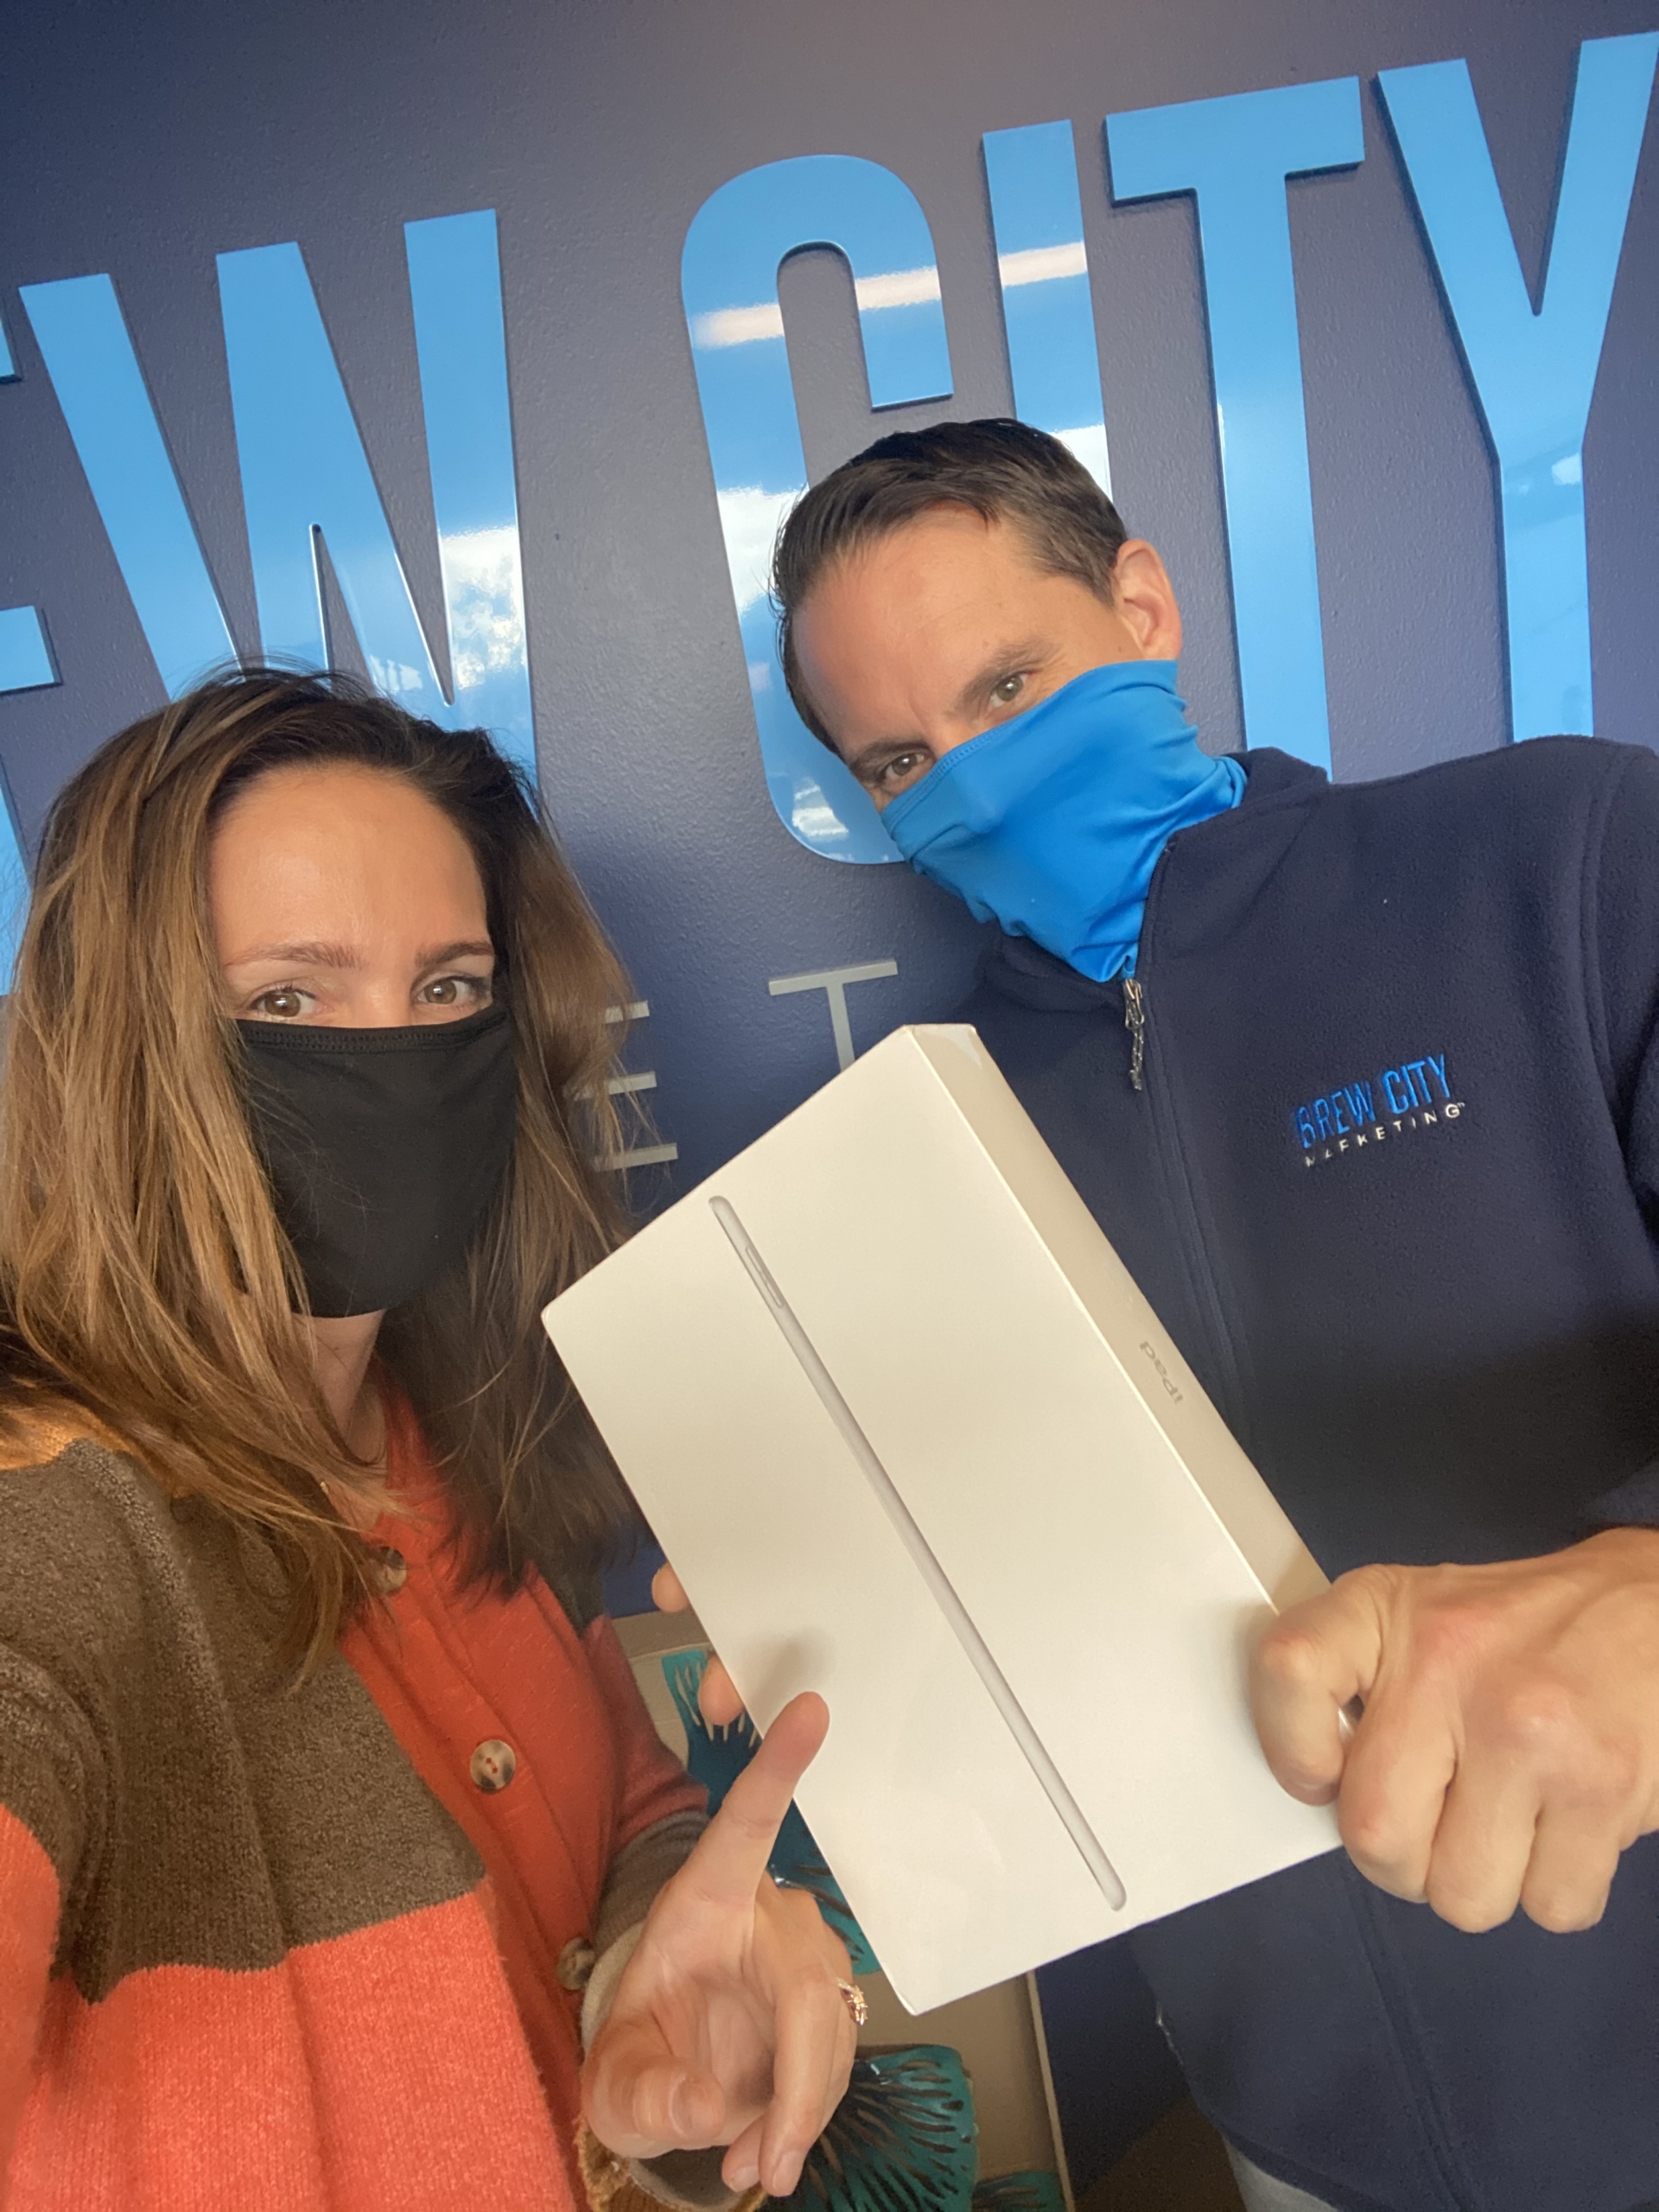 Brew City Marketing team members showing off a brand new iPad for client referrals